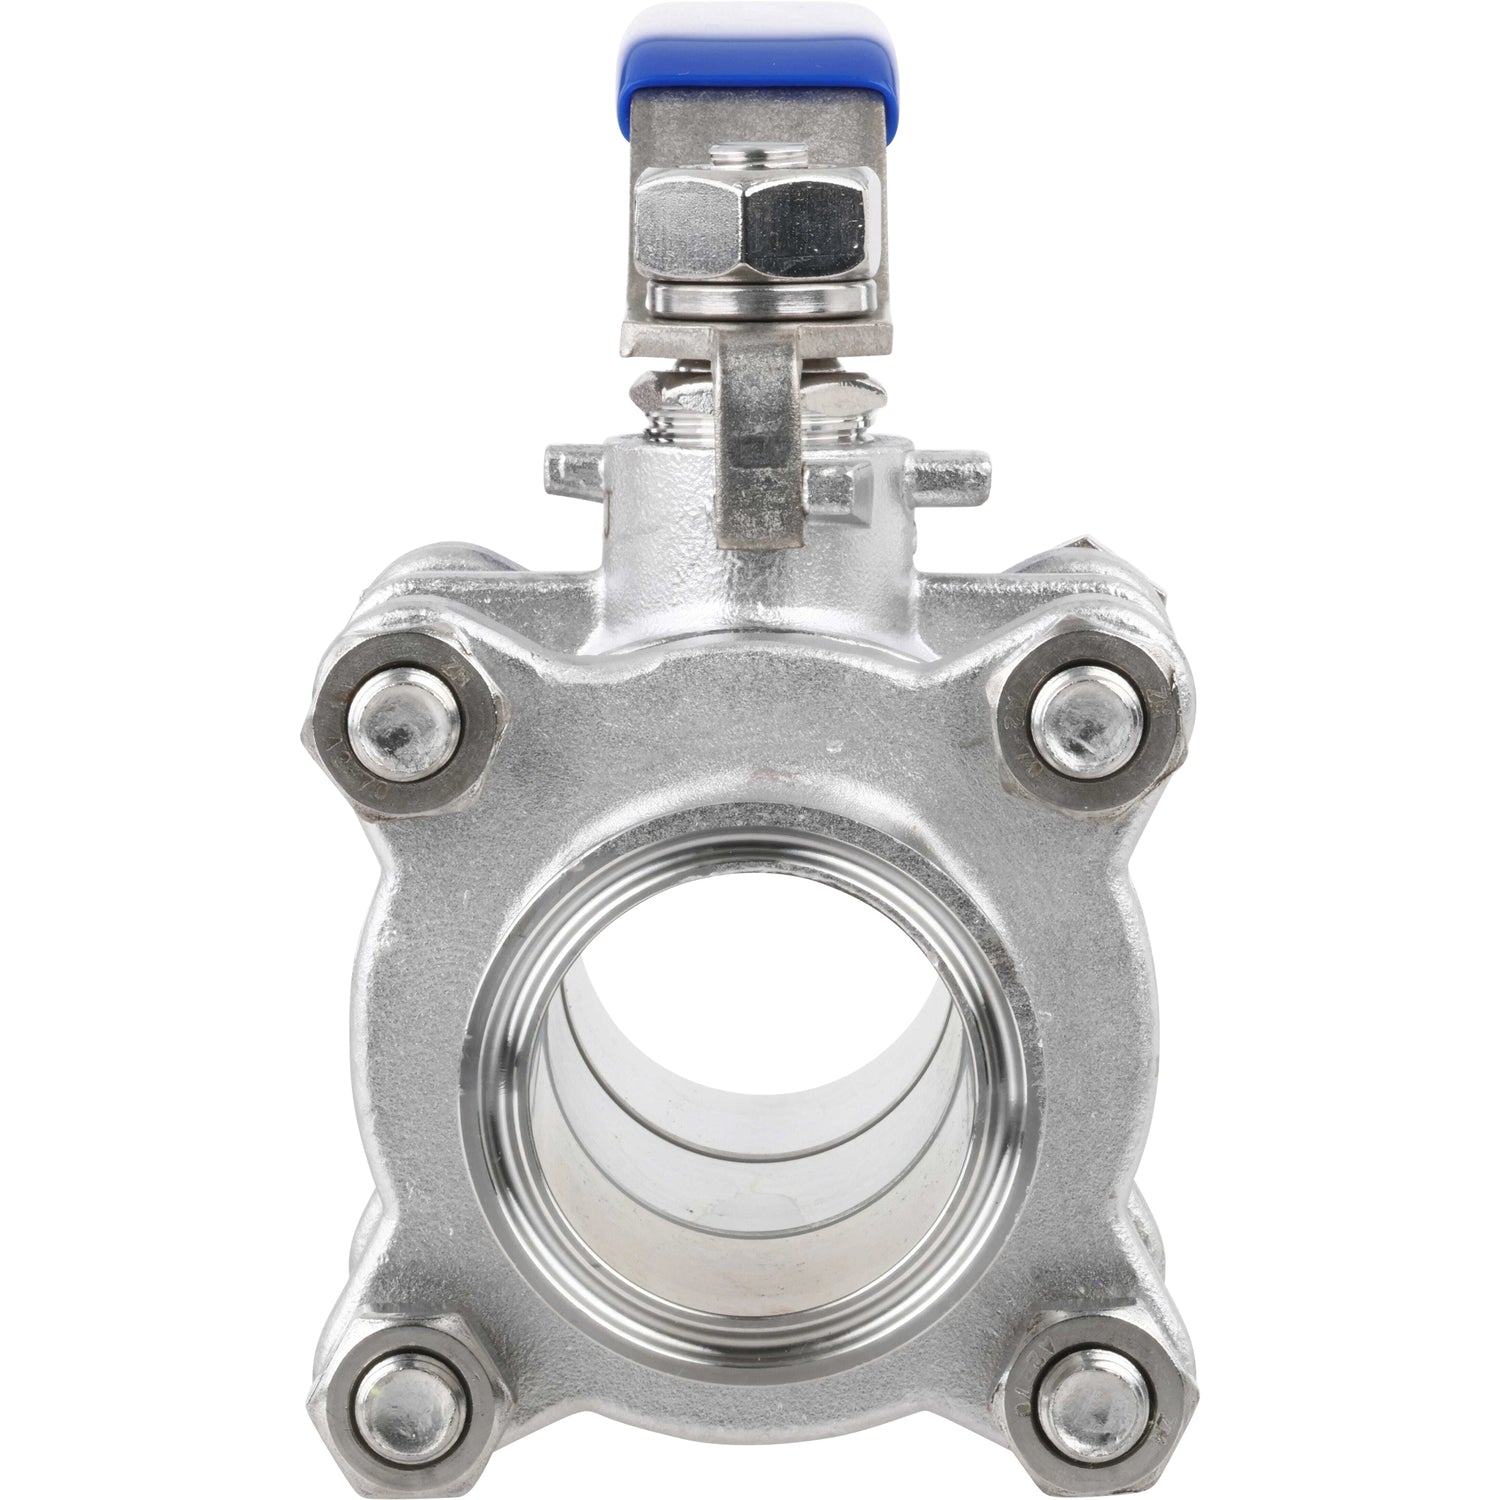 Stainless steel, three piece ball valve with view of opened port and blue handle in the open position. Part shown on white background.